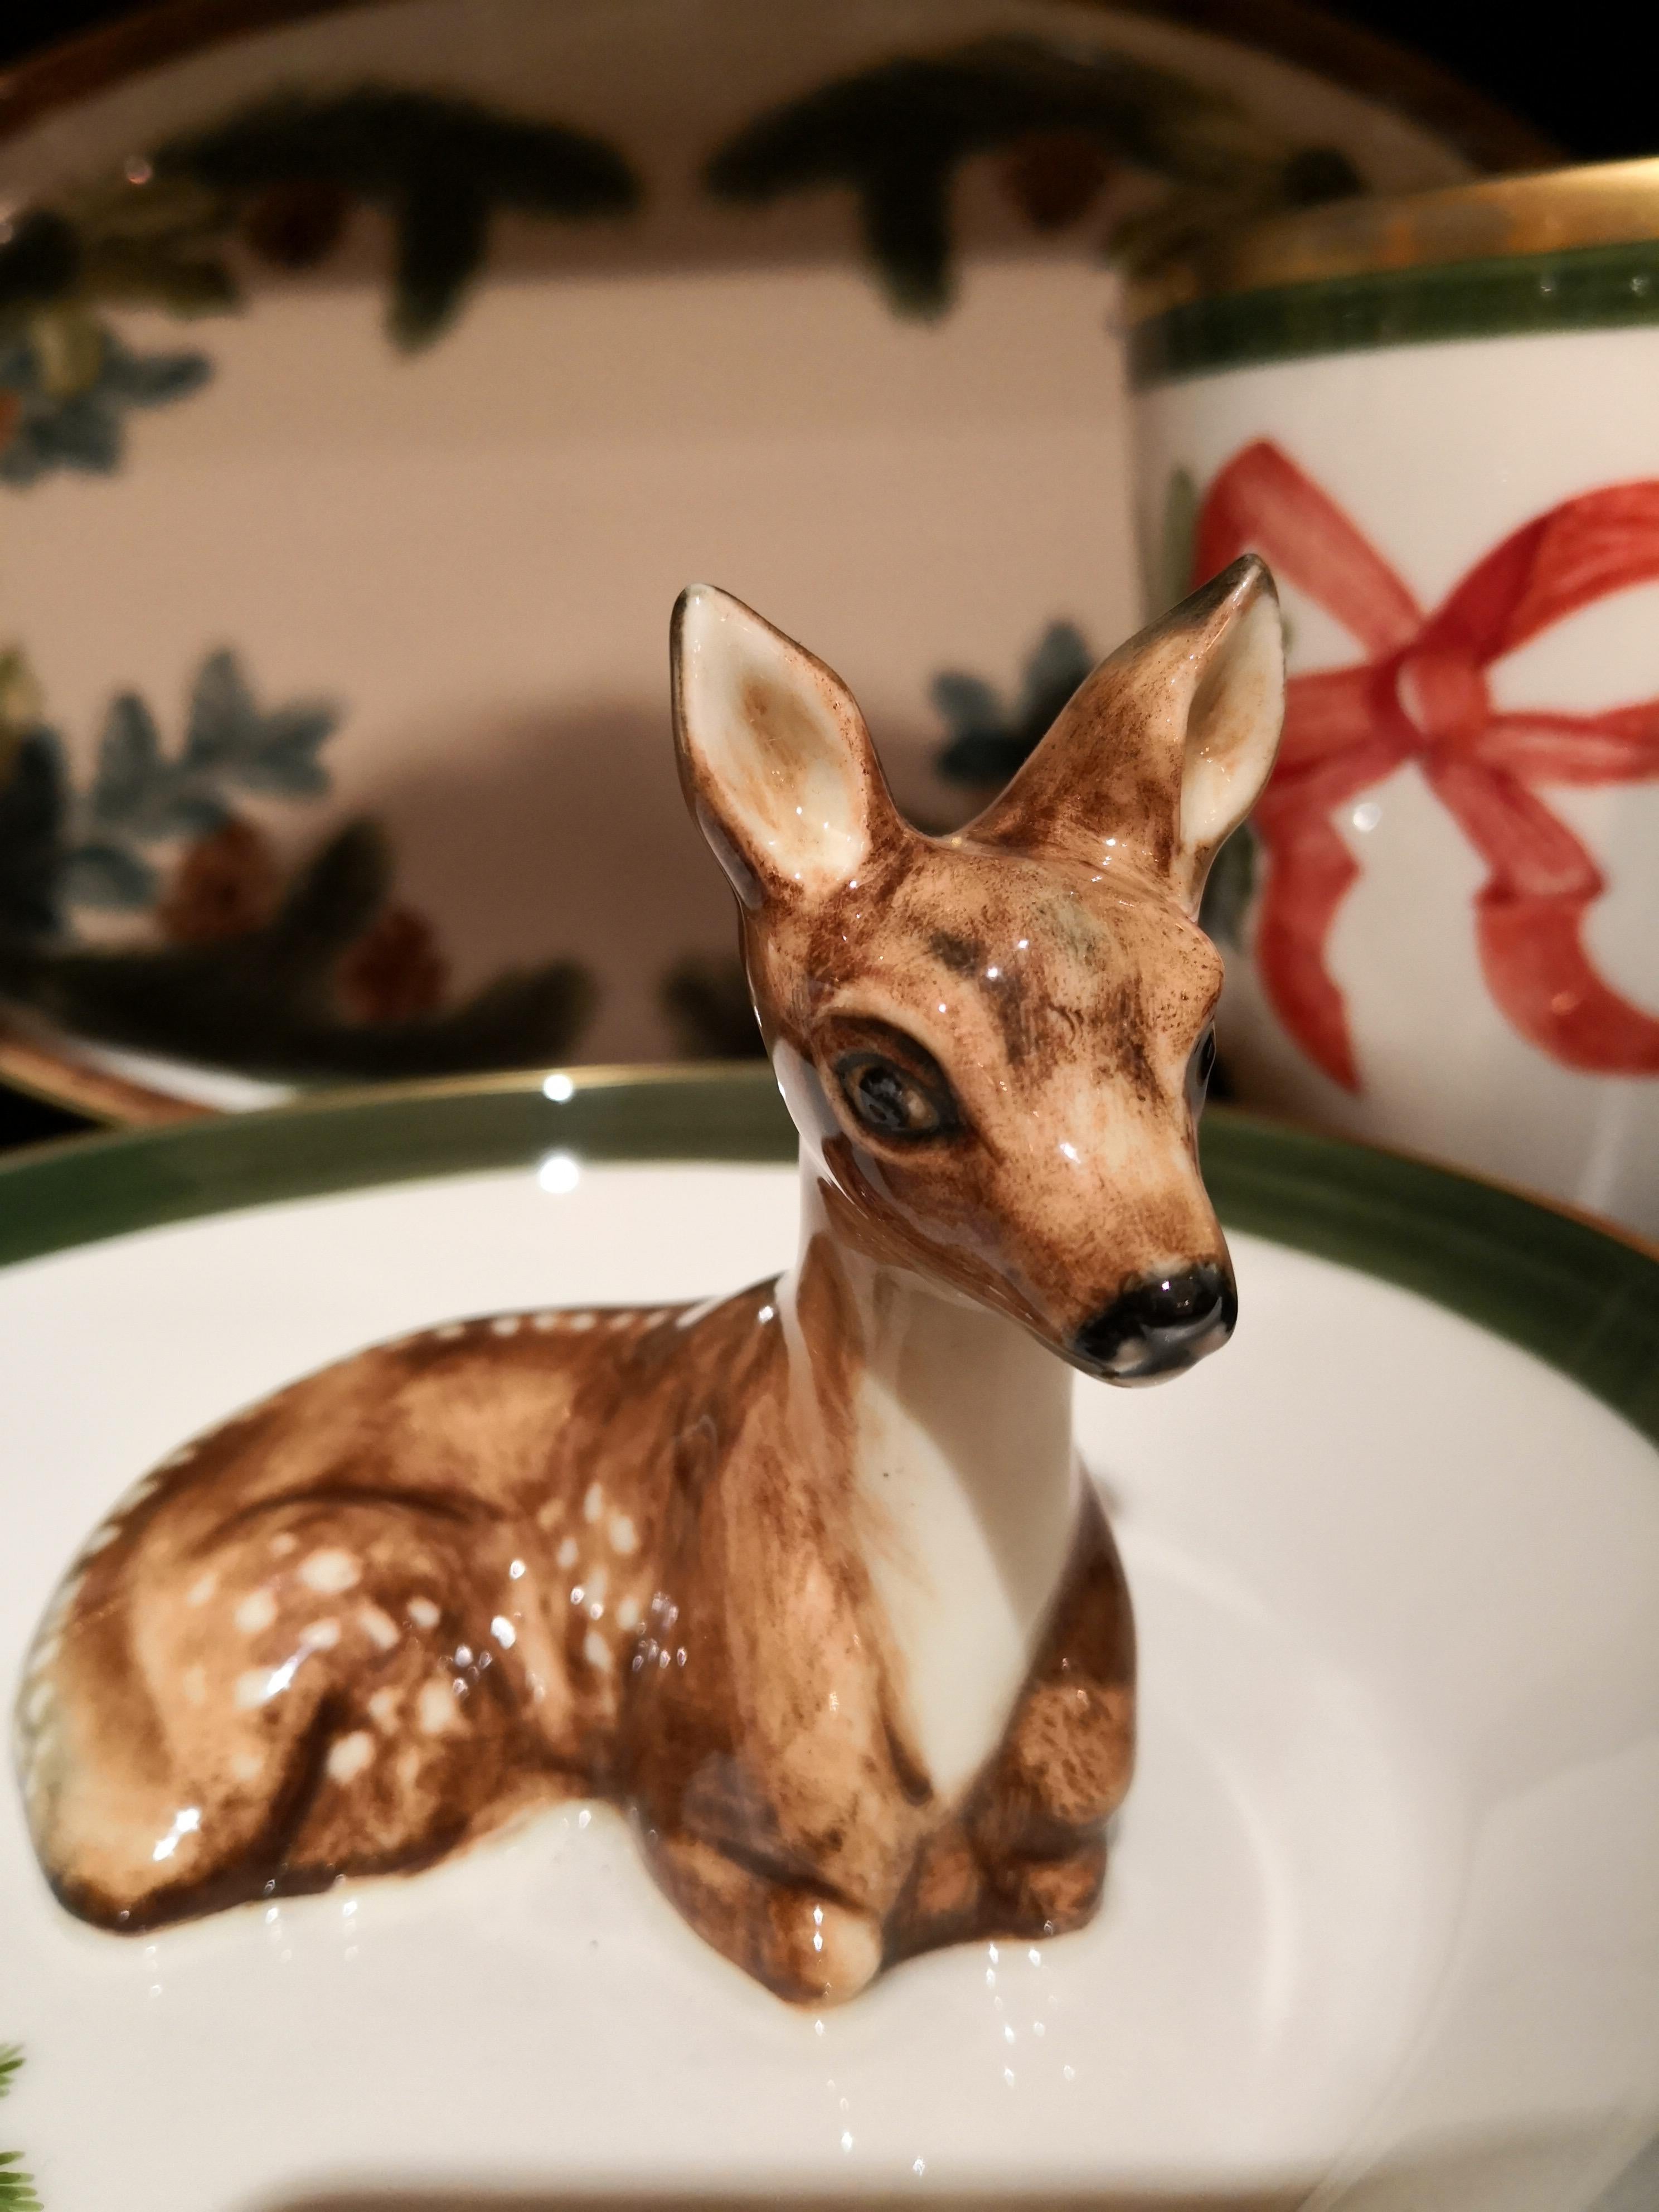 Completely handmade porcelain bowl with a hands-free naturalistic painted bambi figure in brown. The bambi is sitting in the middle of the bowl for decorating nuts or sweets around. Rimmed with a fine 24-carat gold line. Handmade in